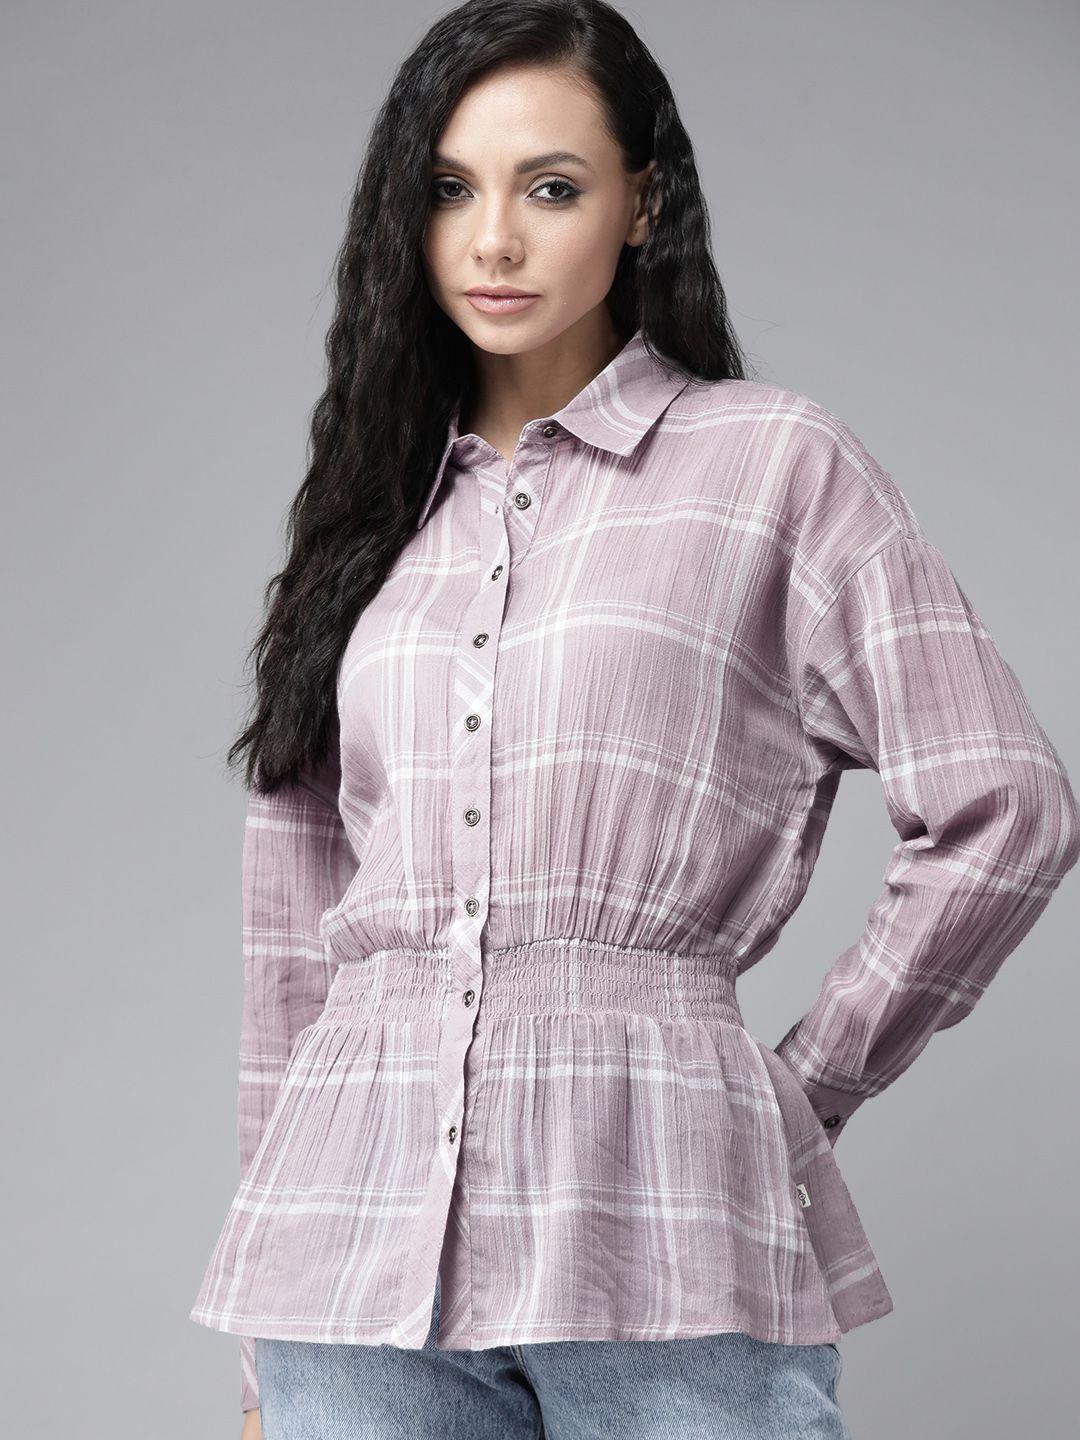 the-roadster-lifestyle-co-women-lavender-&-white-checked-pure-cotton-cinched-waist-casual-shirt